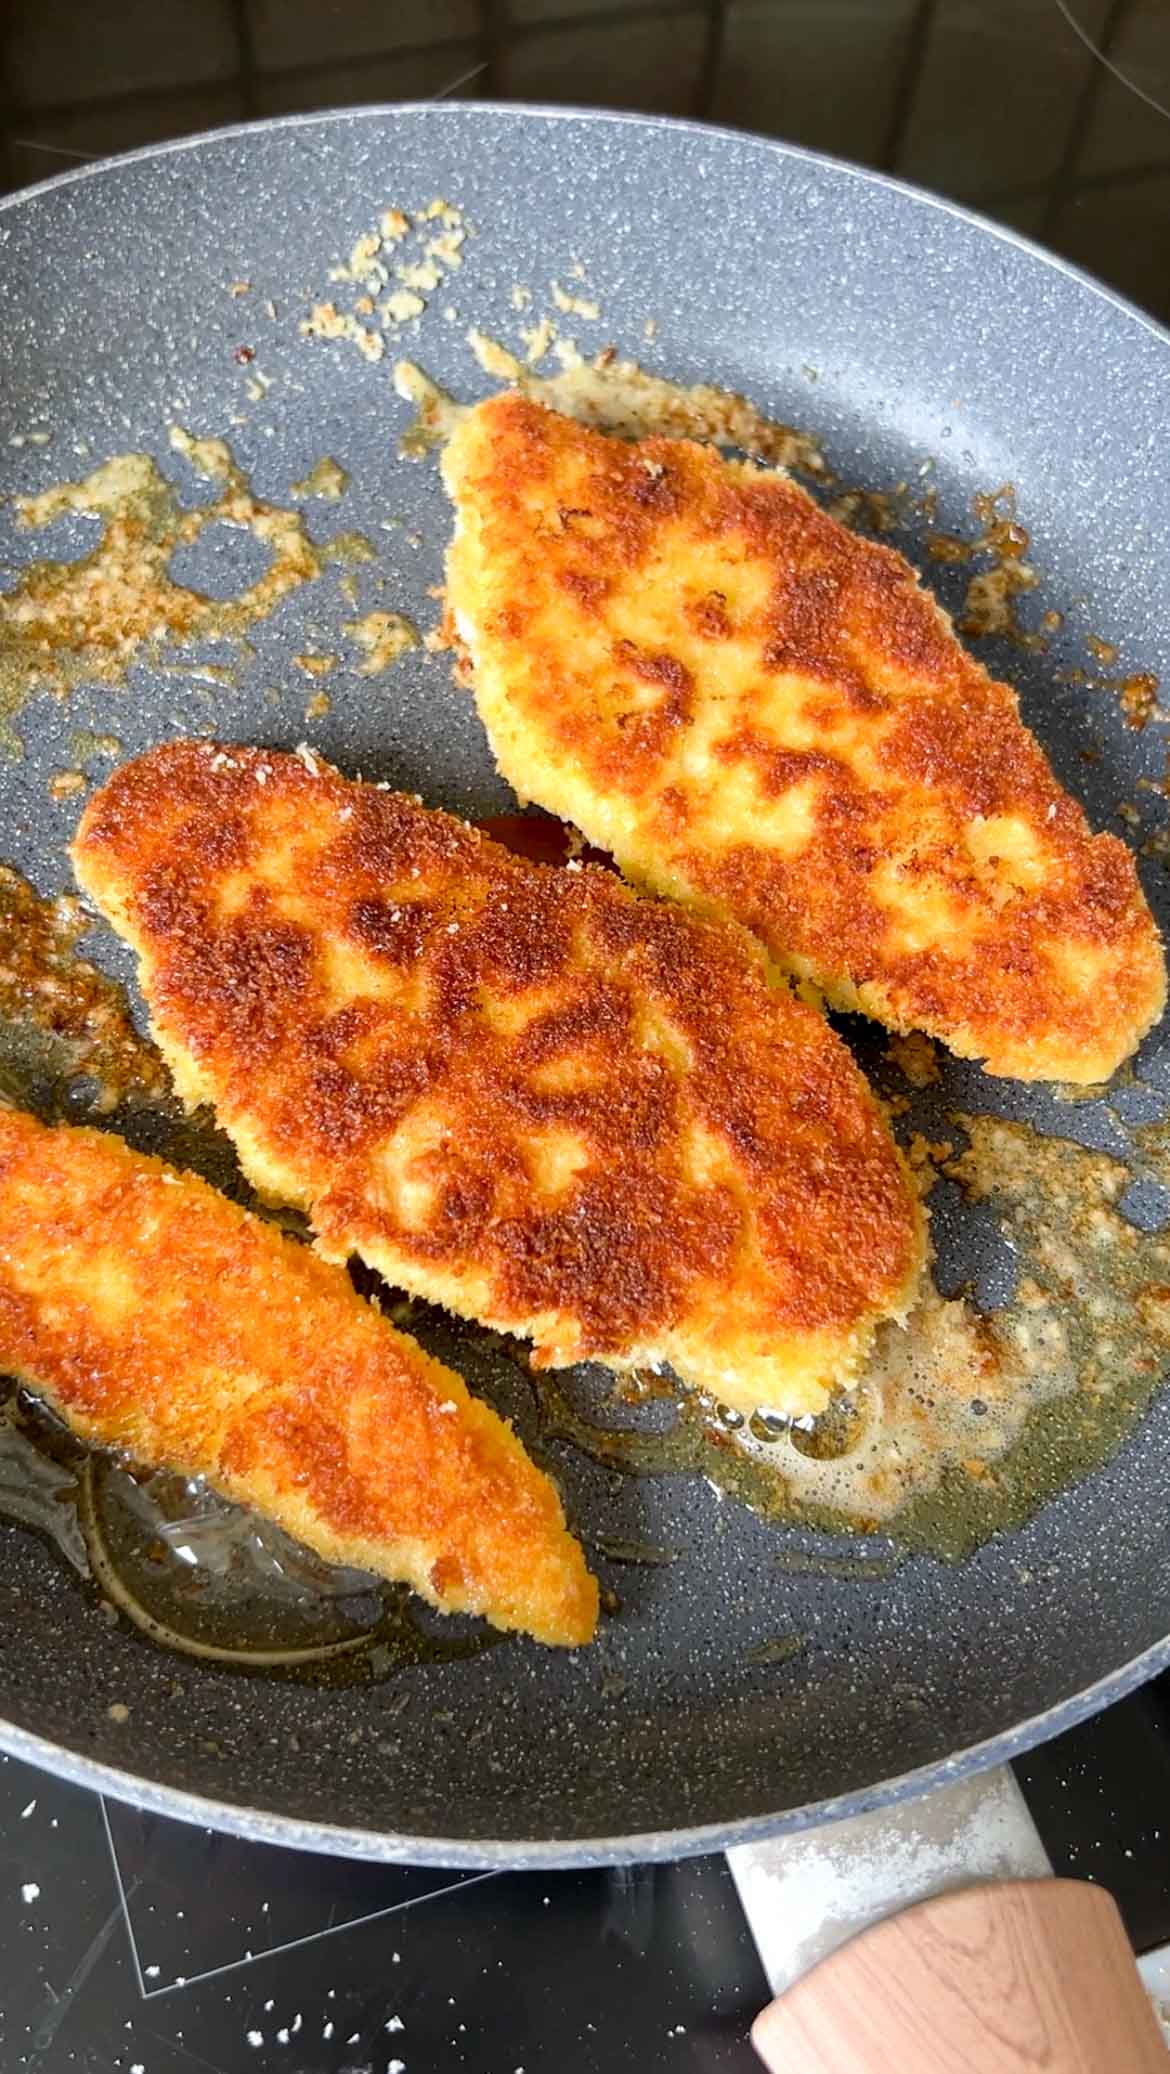 Chicken cutlets in a frying pan with olive oil.